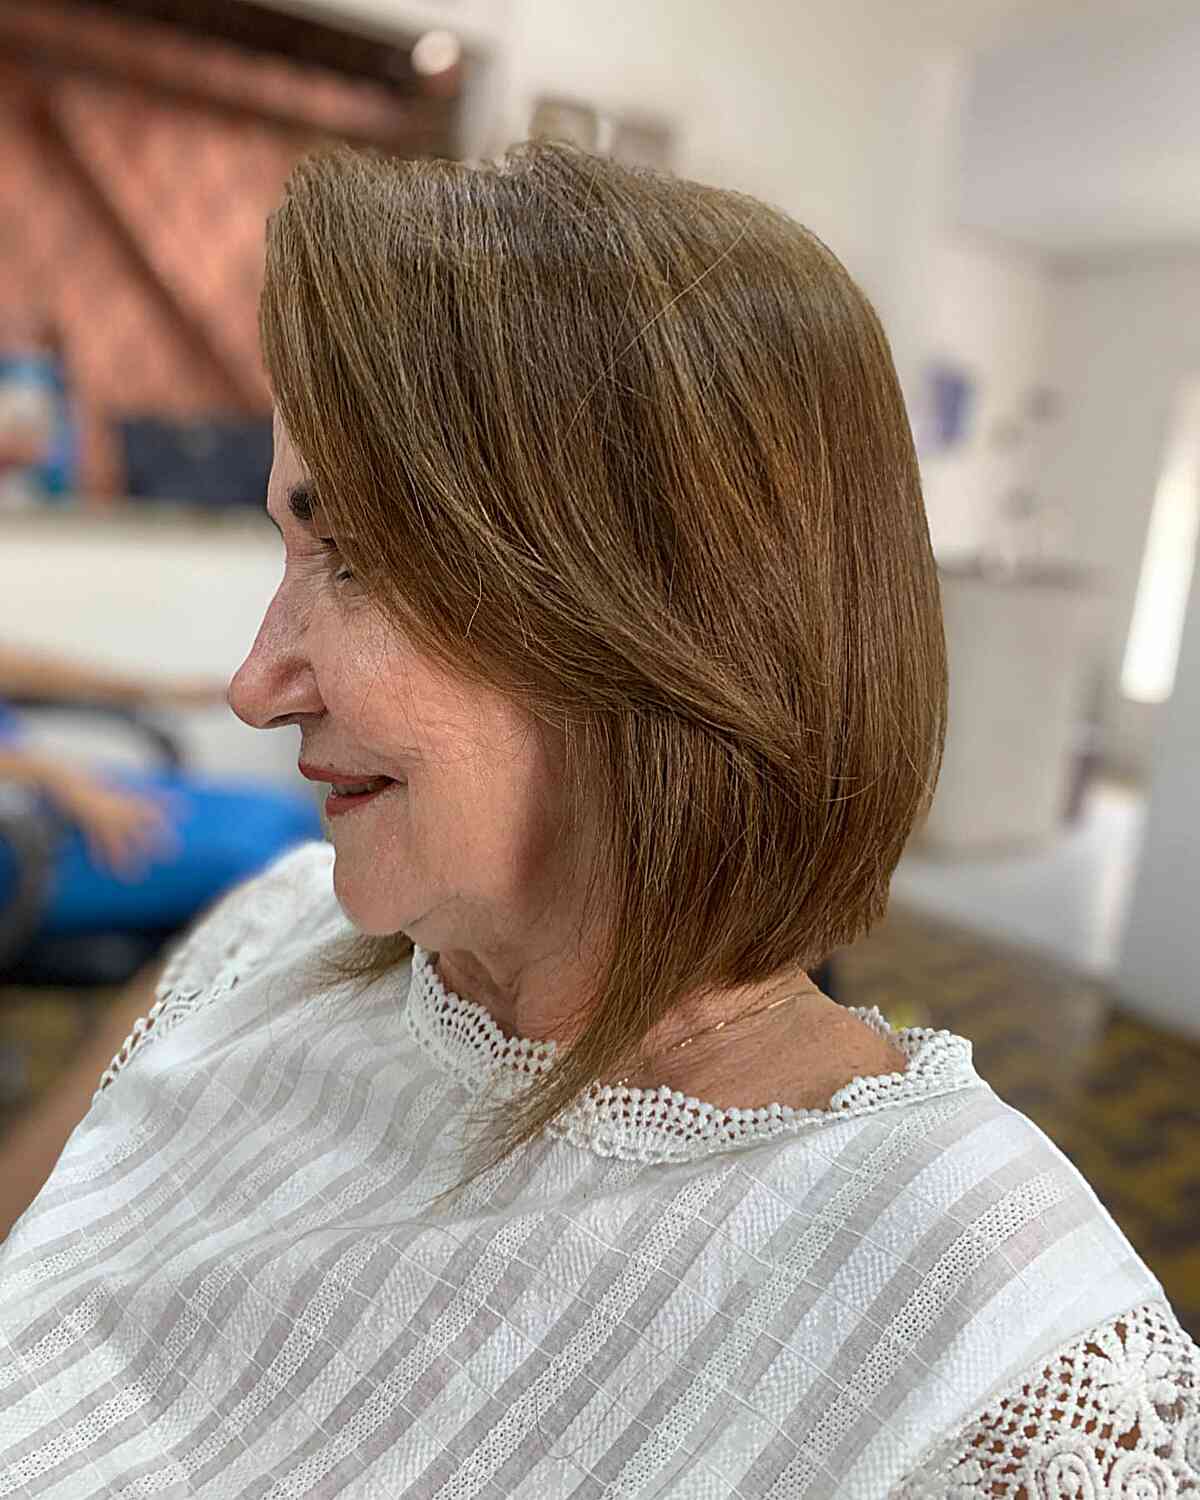 Short Light Brown Swing Bob for Ladies Aged 60 with short hair